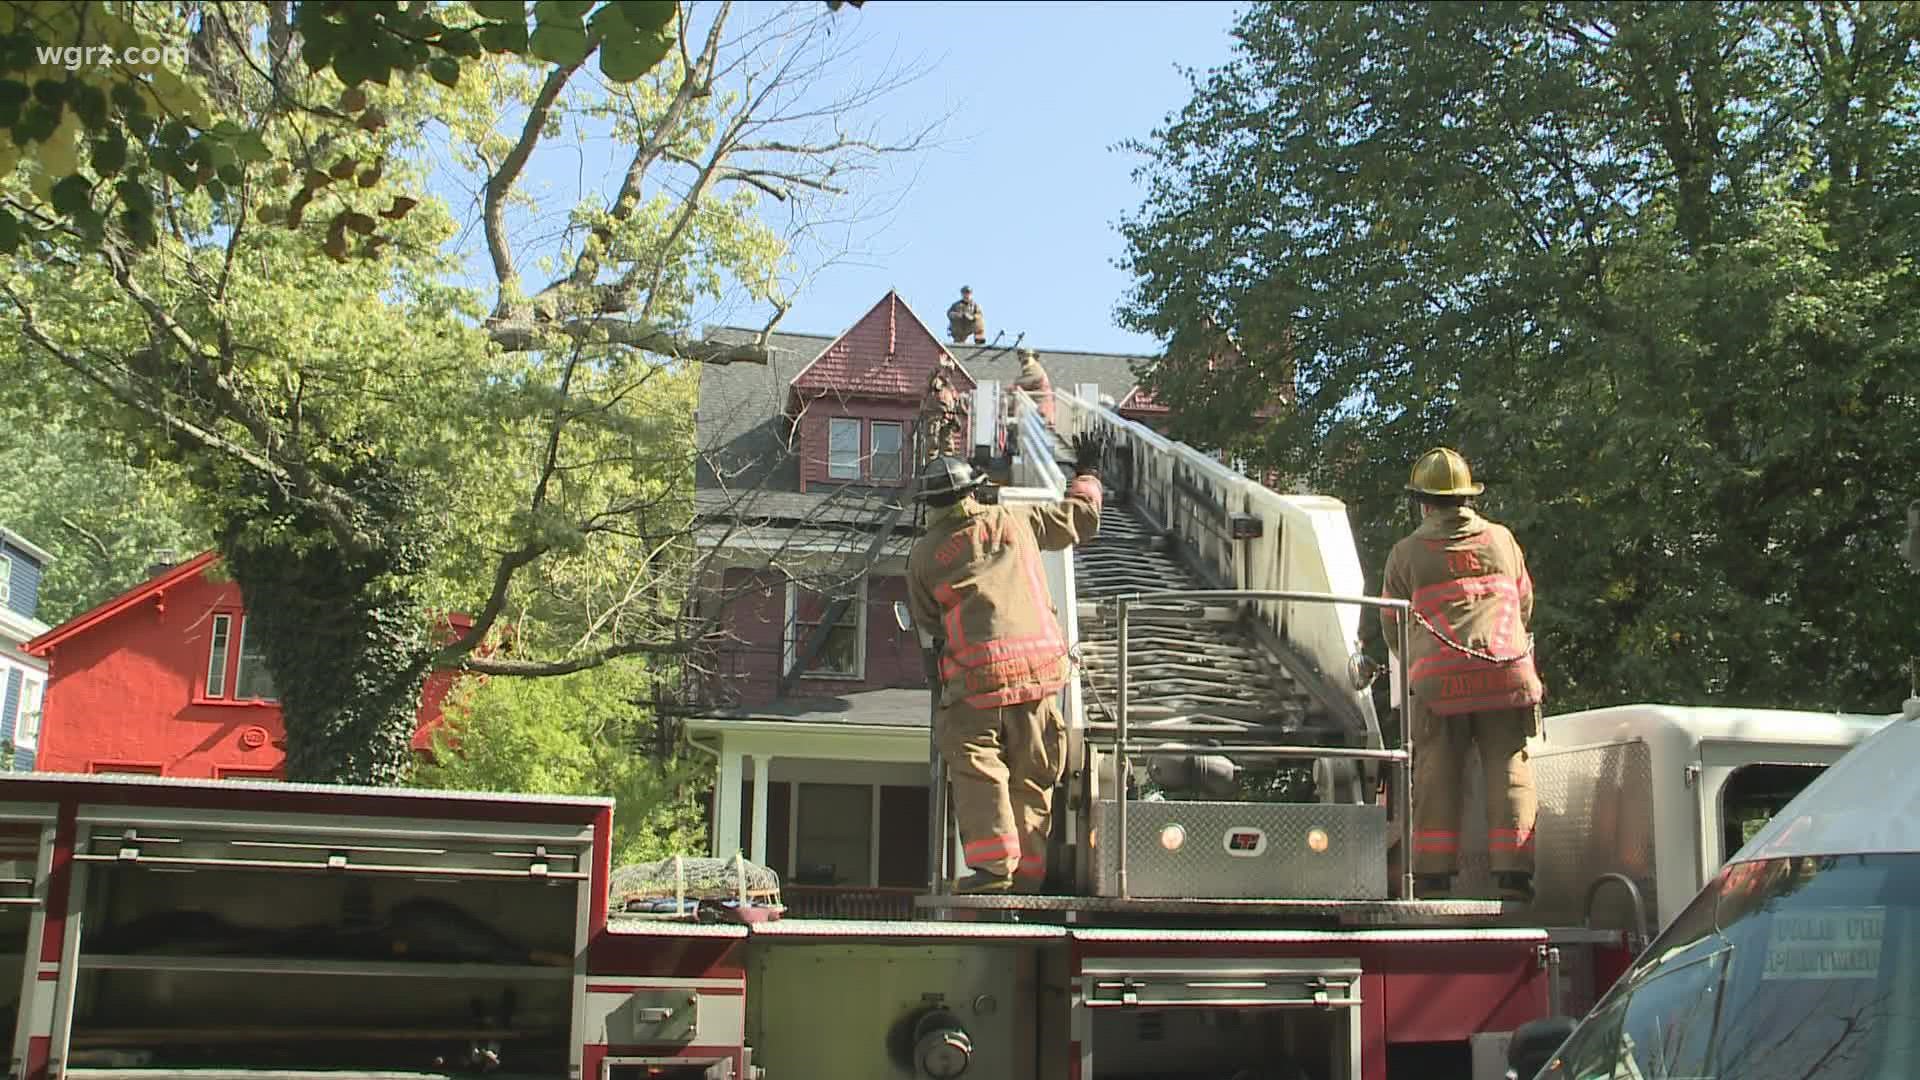 One man had to be rescued by a ladder truck after a fire broke out in a home on Ashland Avenue in Buffalo.